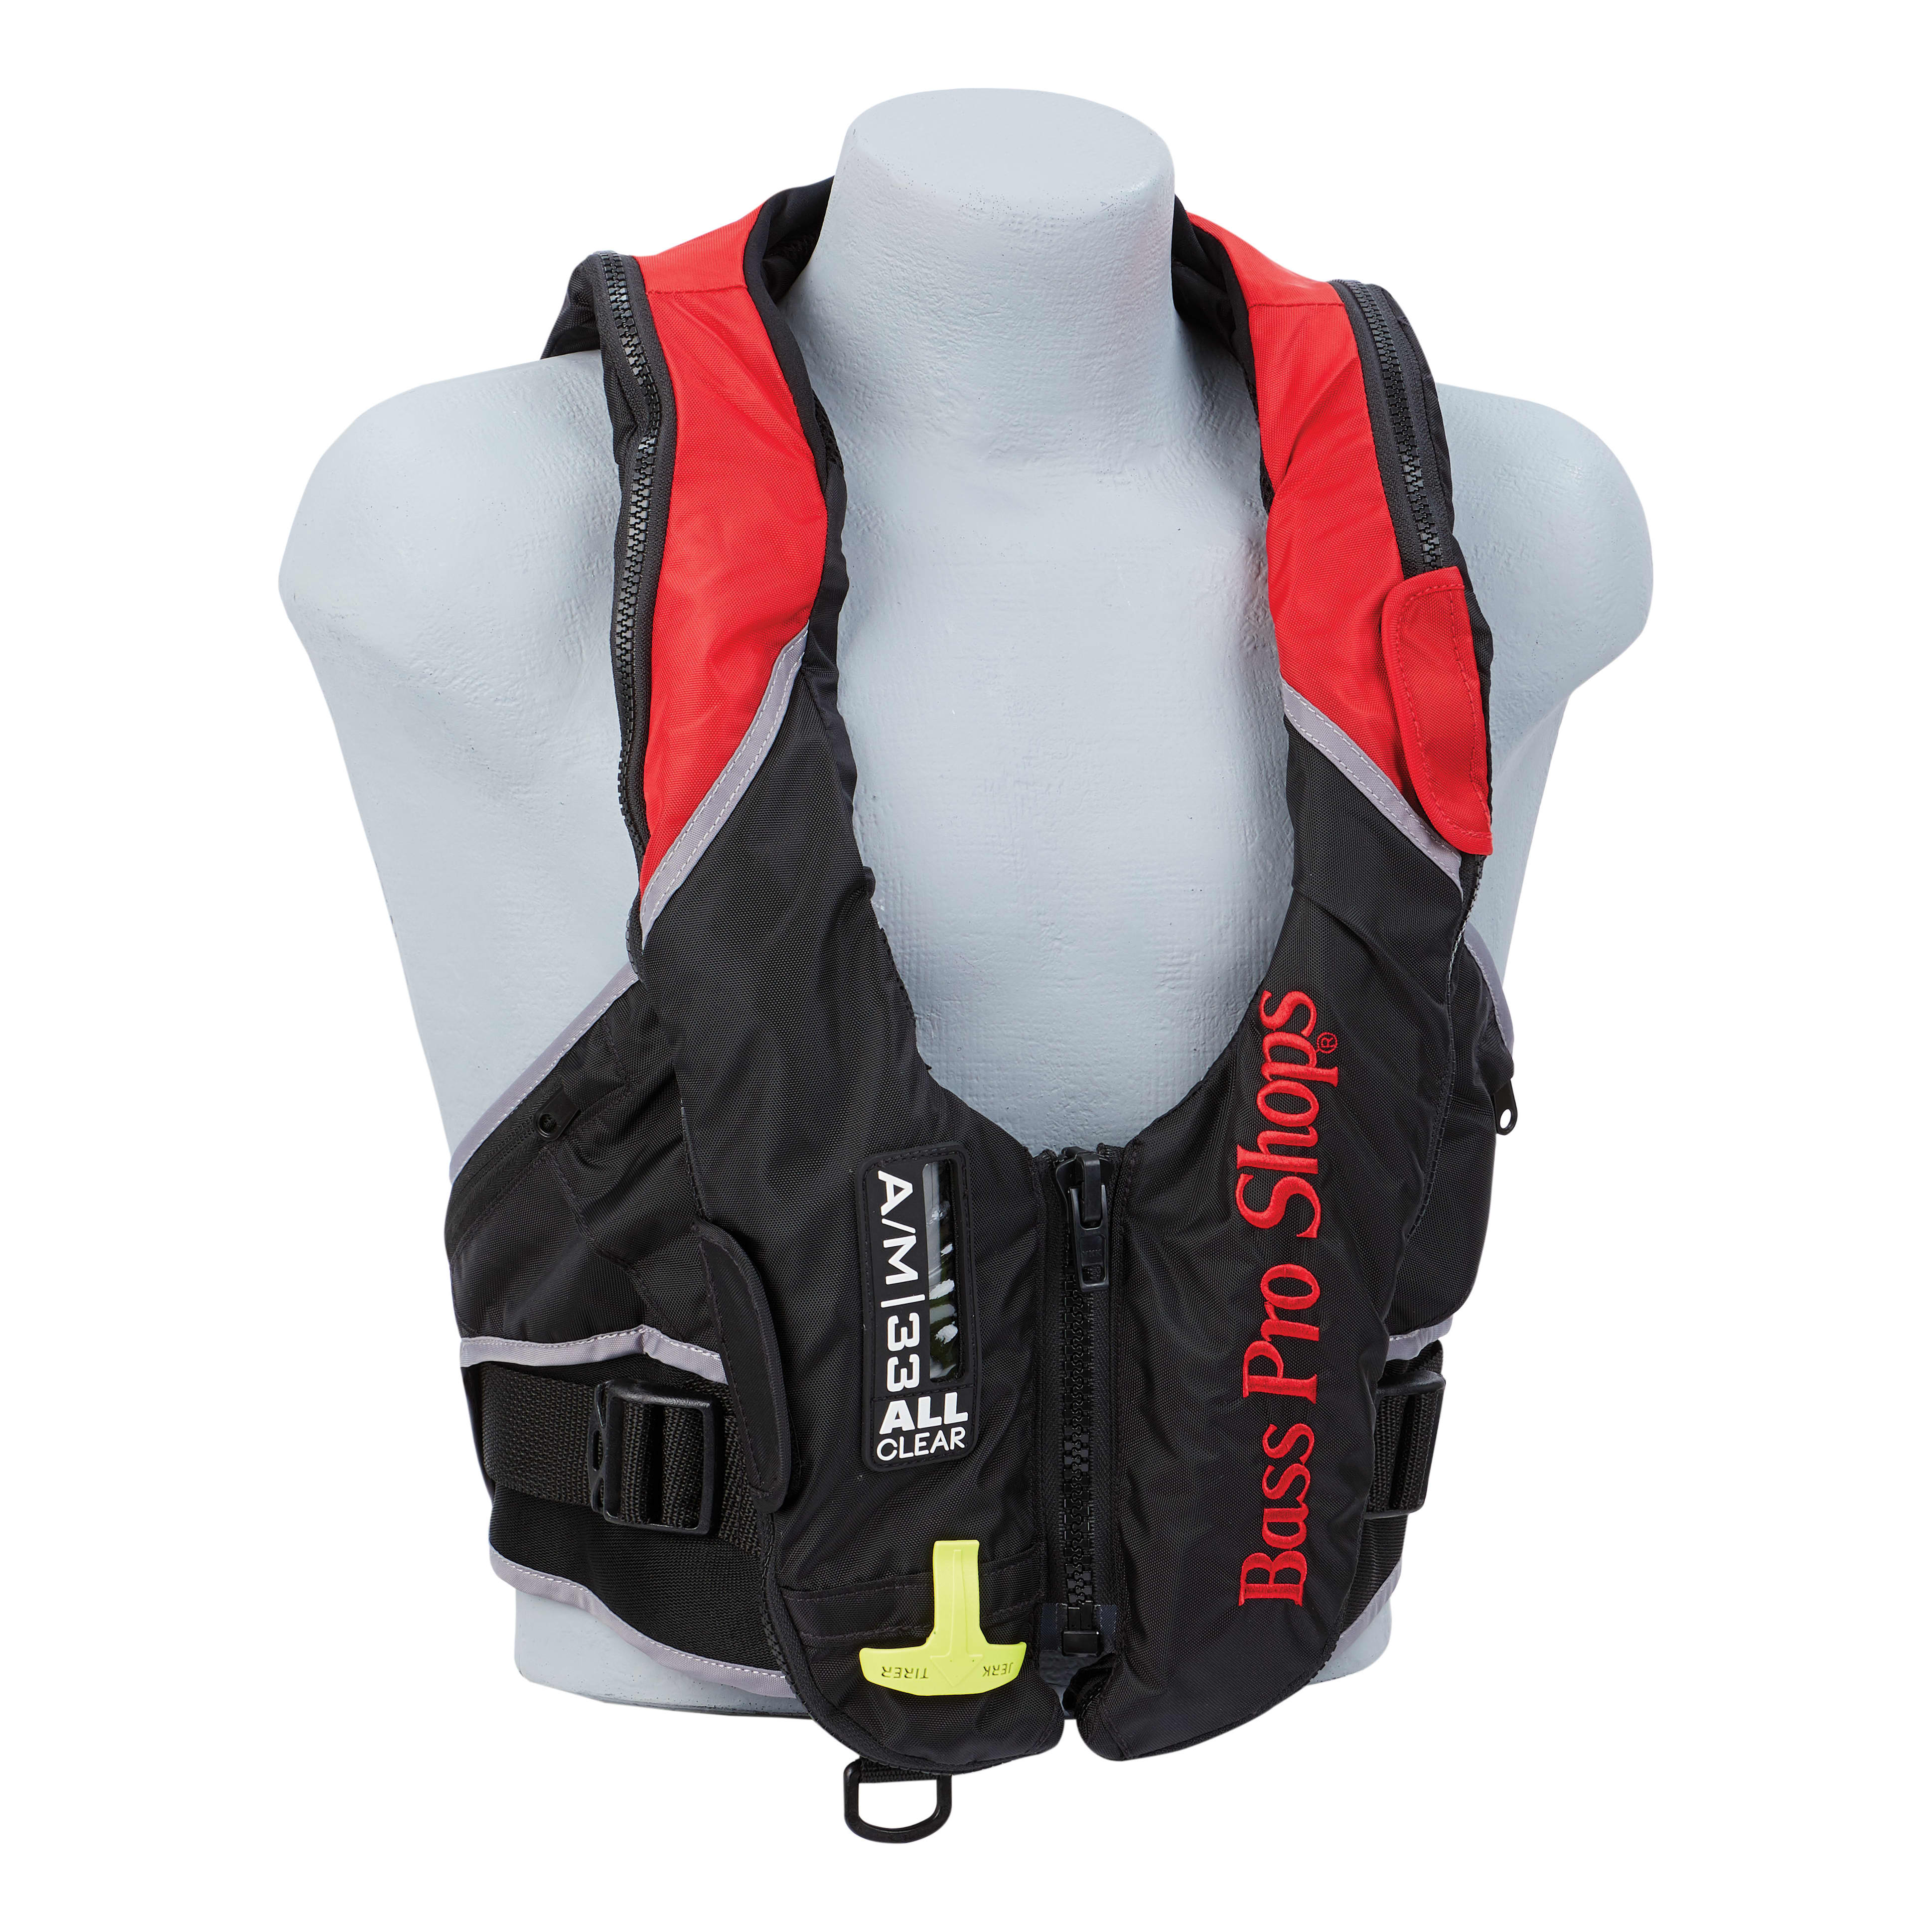 Bass Pro Shops® A/M-33 Deluxe All-Clear Inflatable Life Jacket